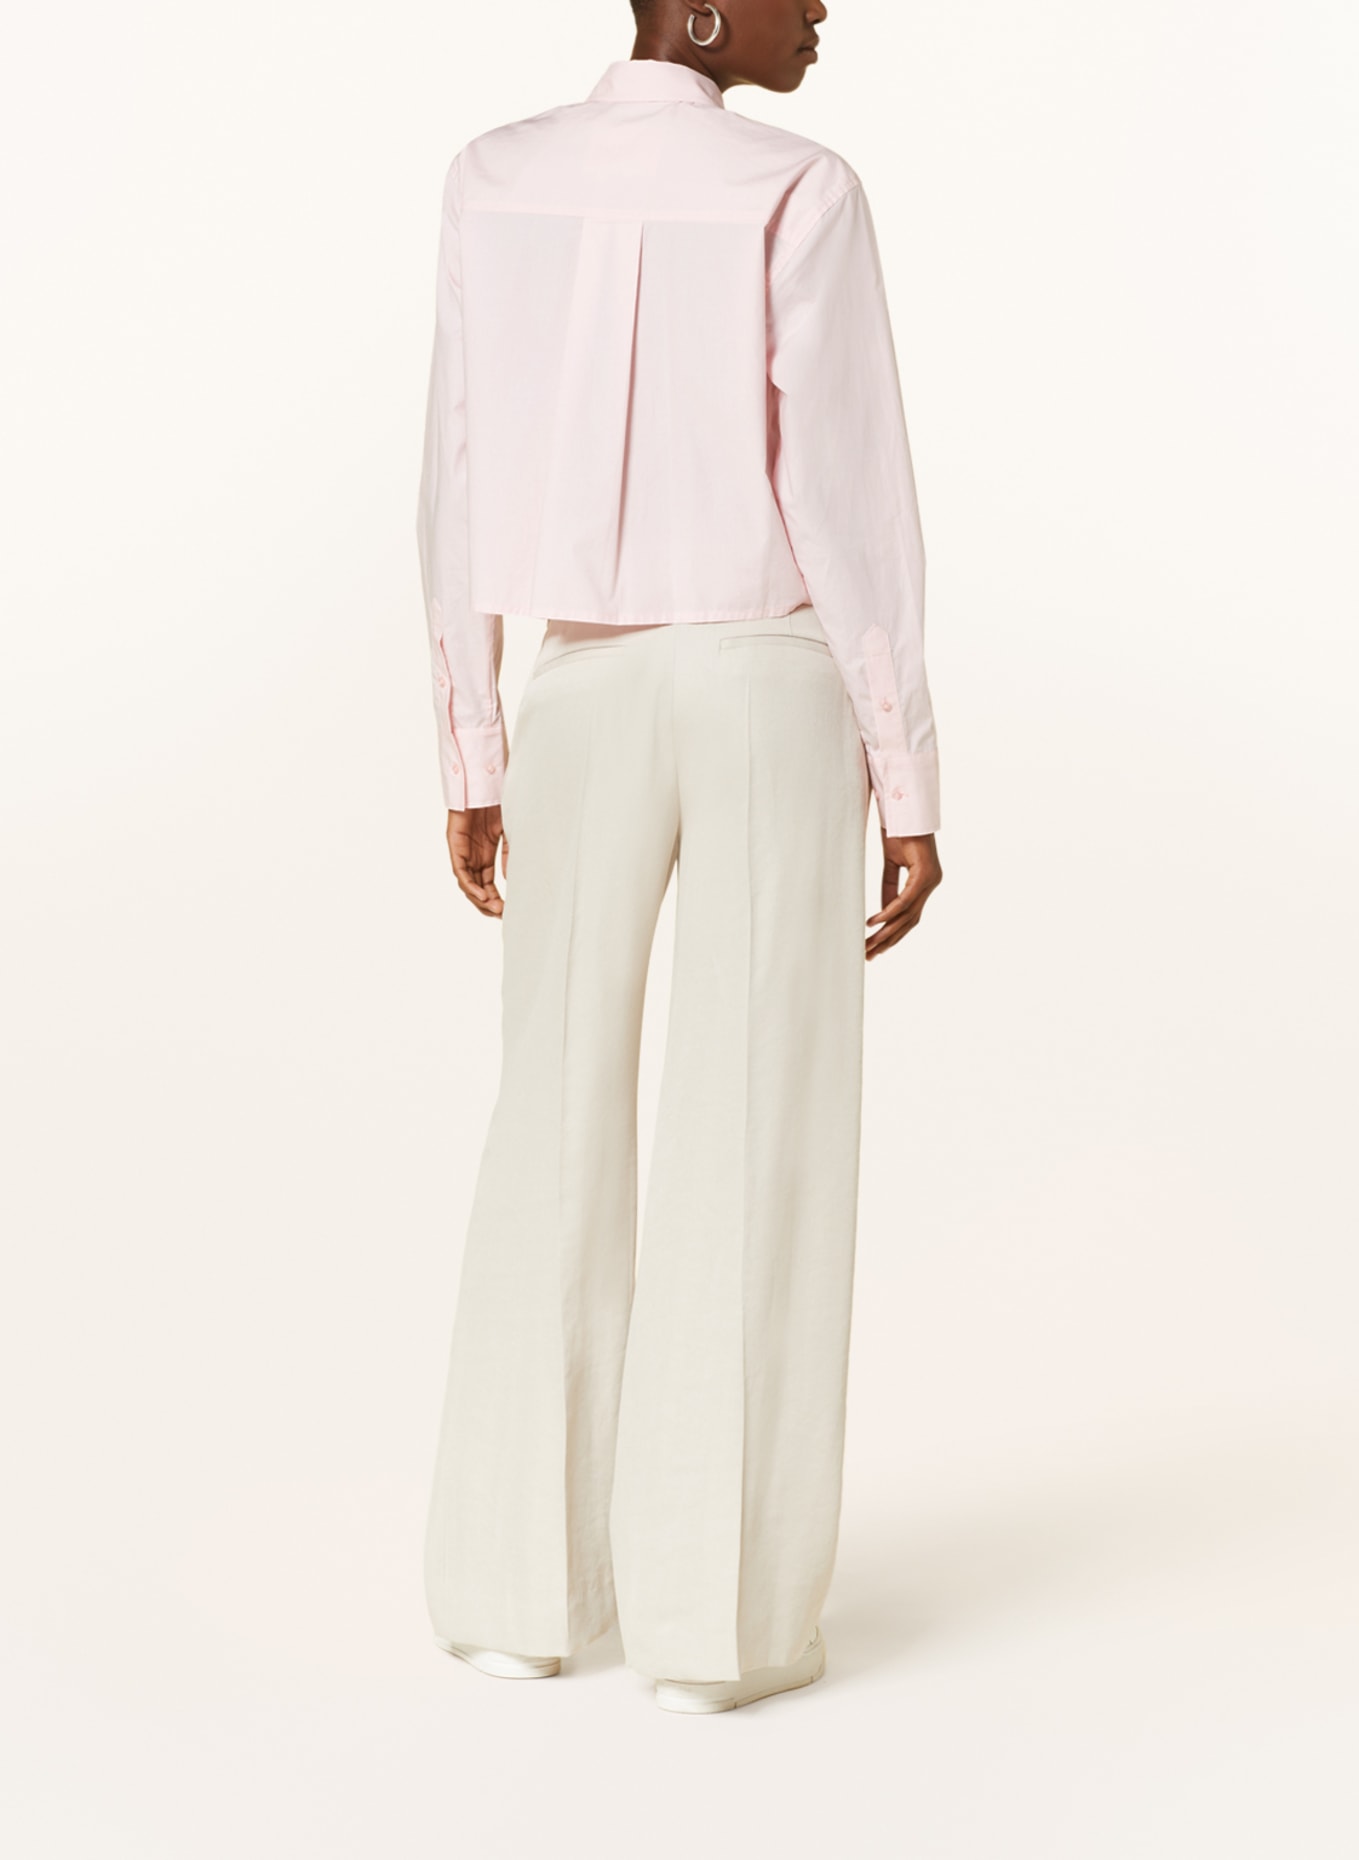 REMAIN Cropped shirt blouse, Color: PINK (Image 3)